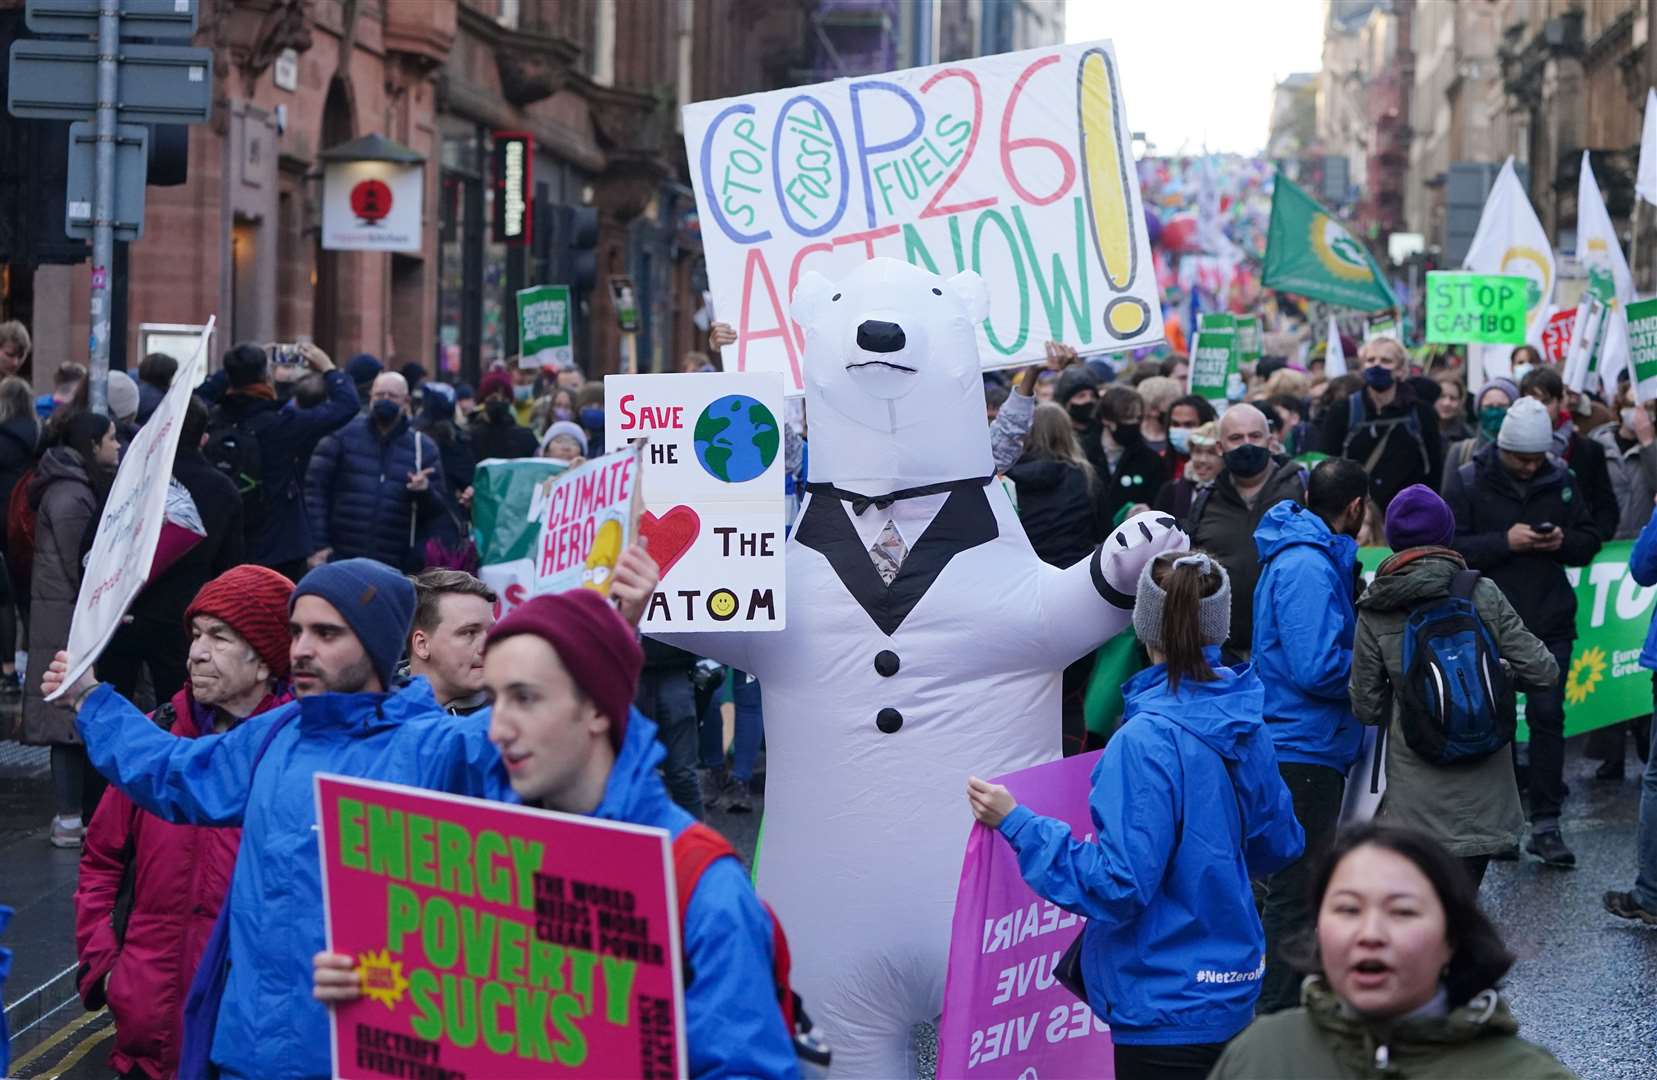 Marchers with placards and wearing fancy dress thronged the streets despite the weather in Glasgow (Jane Barlow/PA)